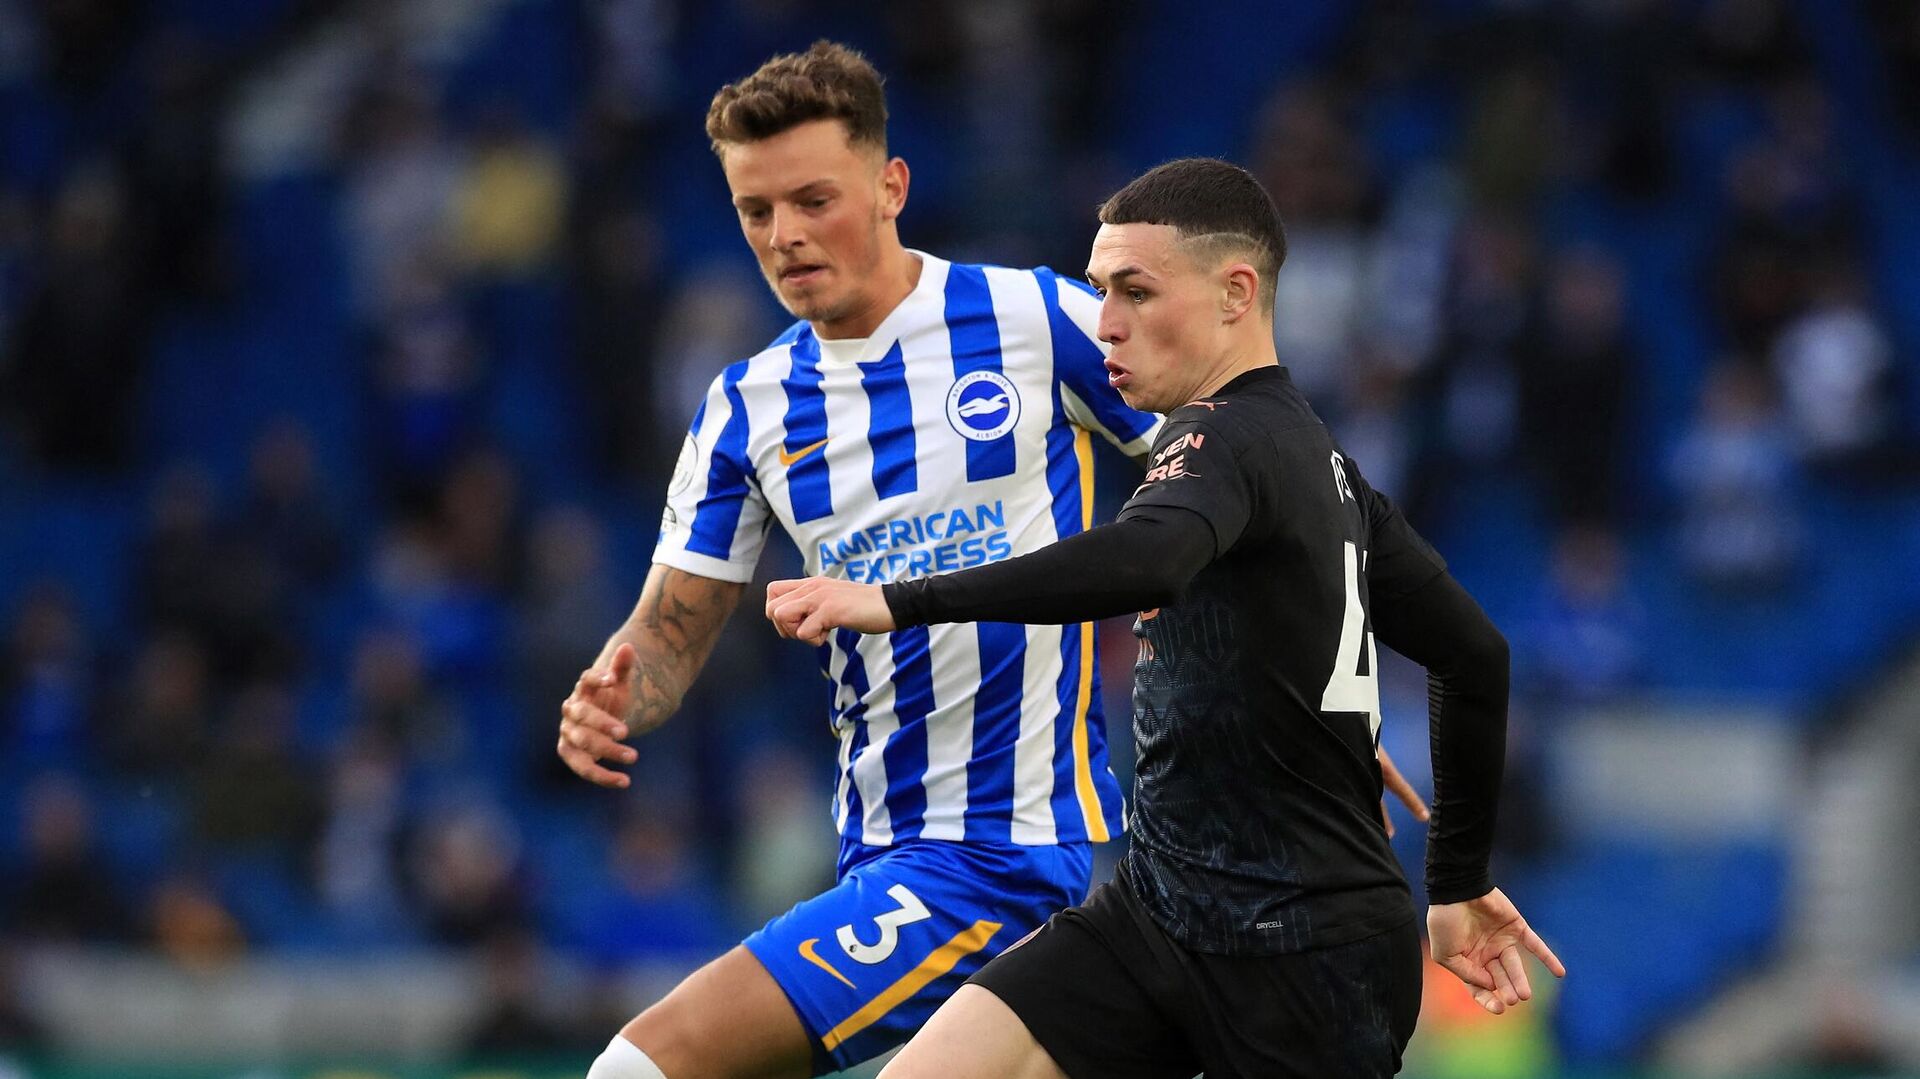 Manchester City's English midfielder Phil Foden runs past Brighton's English defender Ben White to scores his team's second goal during the English Premier League football match between Brighton and Hove Albion and Manchester City at the American Express Community Stadium in Brighton, southern England on May 18, 2021. (Photo by Gareth Fuller / POOL / AFP) / RESTRICTED TO EDITORIAL USE. No use with unauthorized audio, video, data, fixture lists, club/league logos or 'live' services. Online in-match use limited to 120 images. An additional 40 images may be used in extra time. No video emulation. Social media in-match use limited to 120 images. An additional 40 images may be used in extra time. No use in betting publications, games or single club/league/player publications. /  - РИА Новости, 1920, 17.07.2021